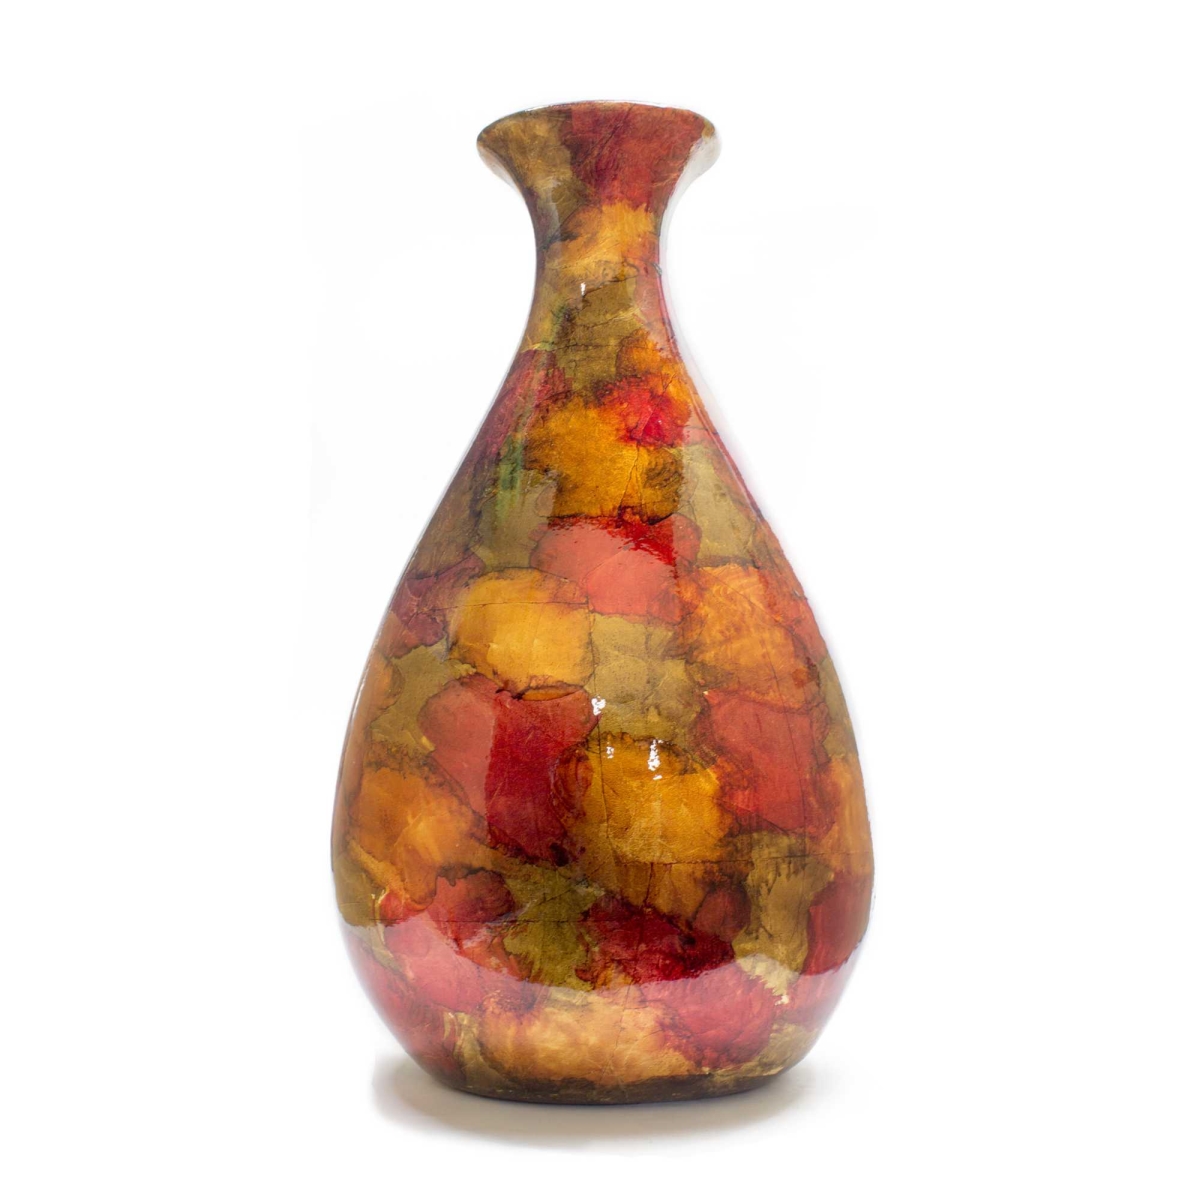 Home Roots Beddings 328632 Ceramic Floor Vase, Copper, Red & Gold - 18.5 In.